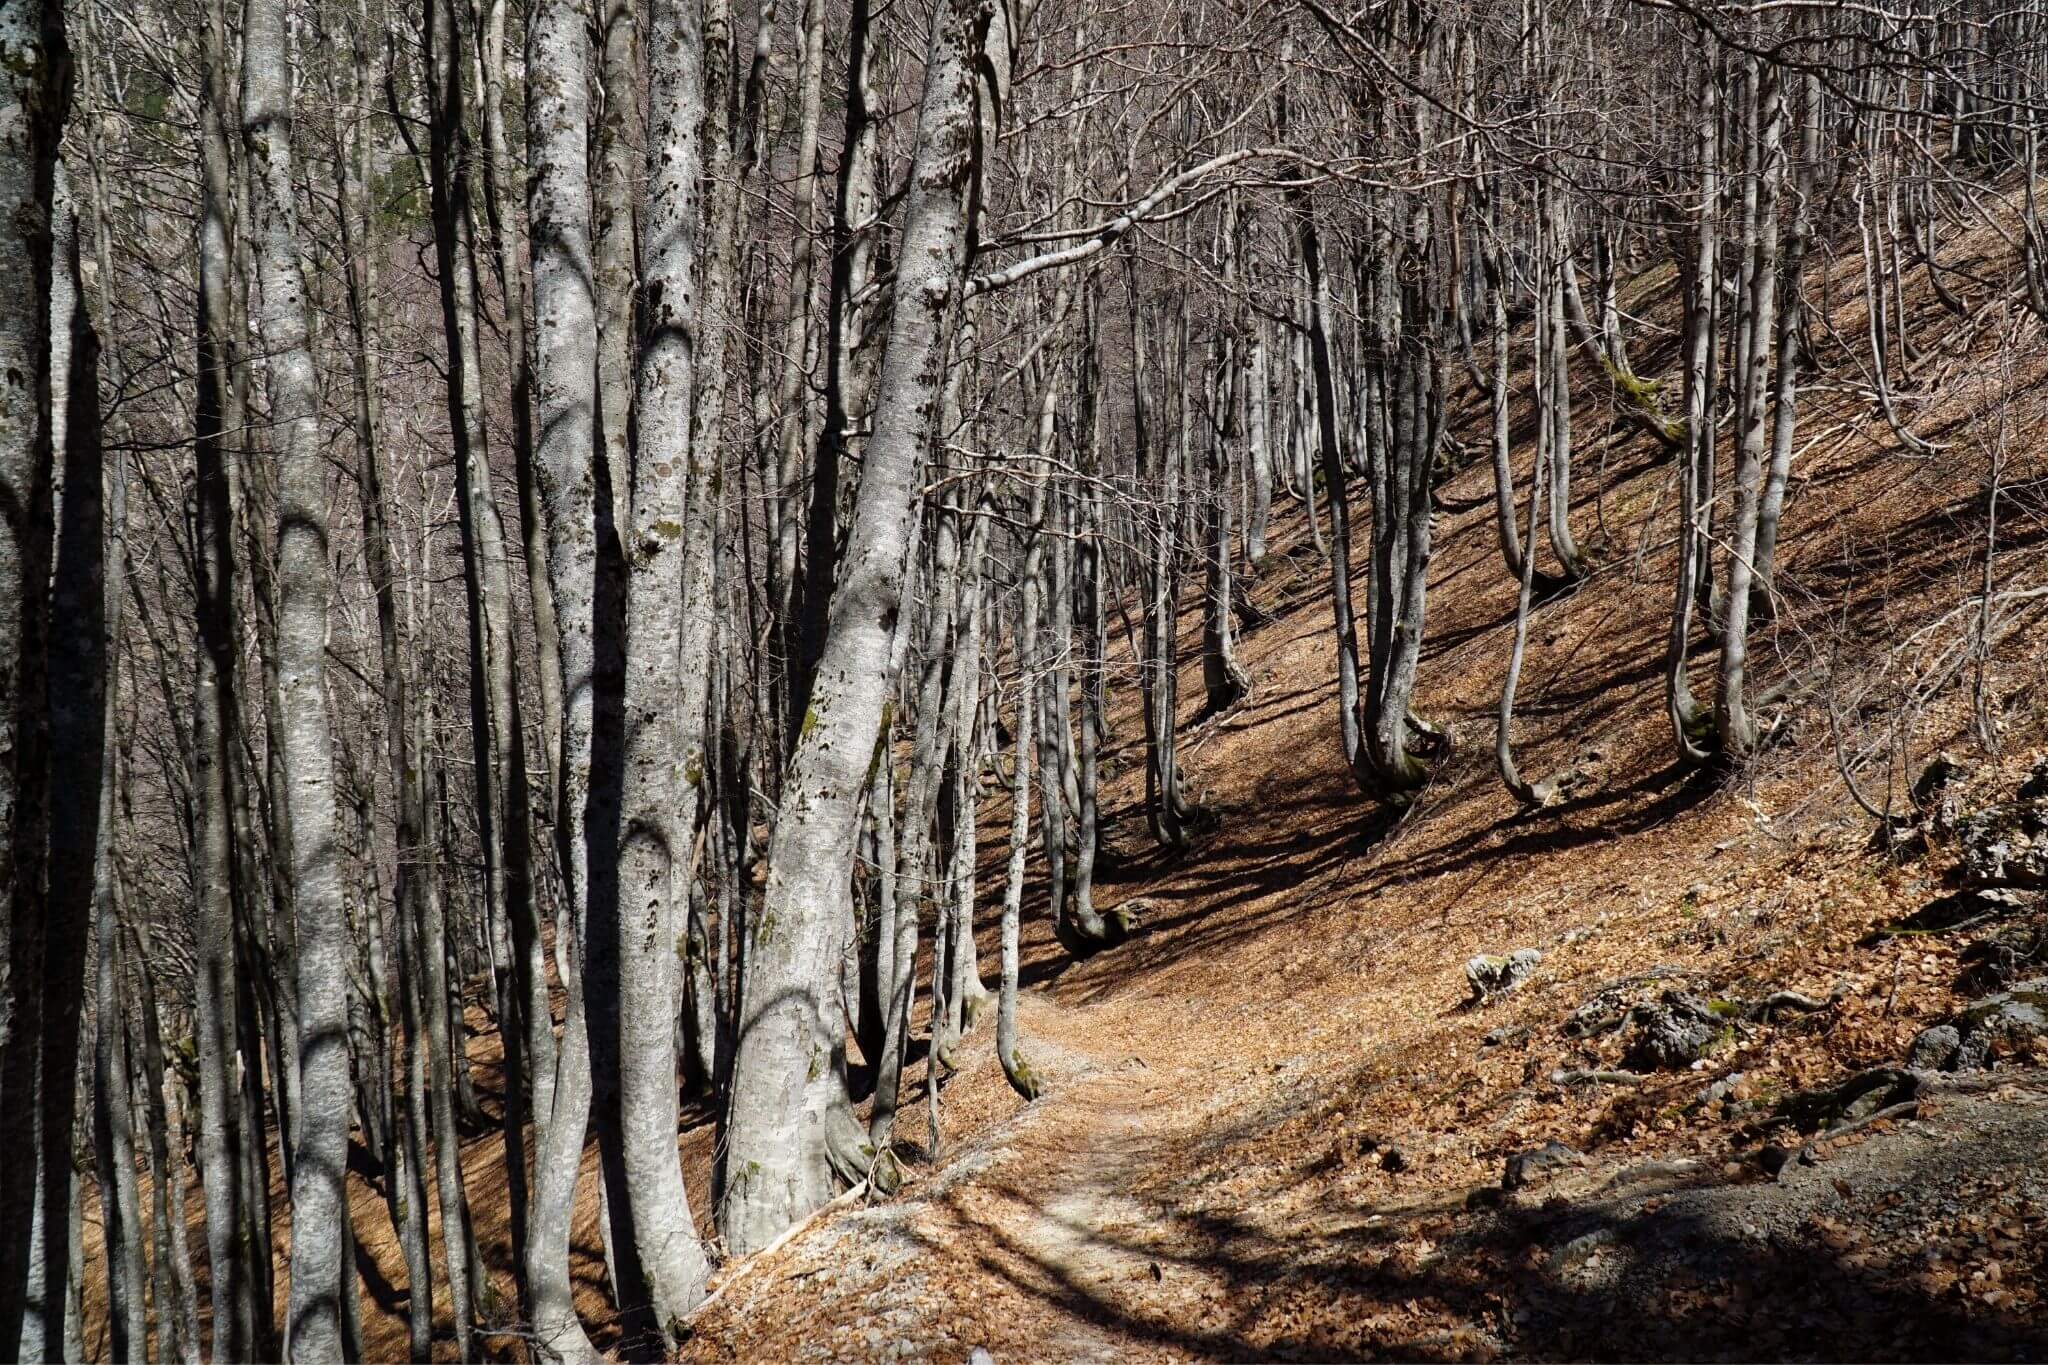 Woodland path on the descent from the Valbona Pass